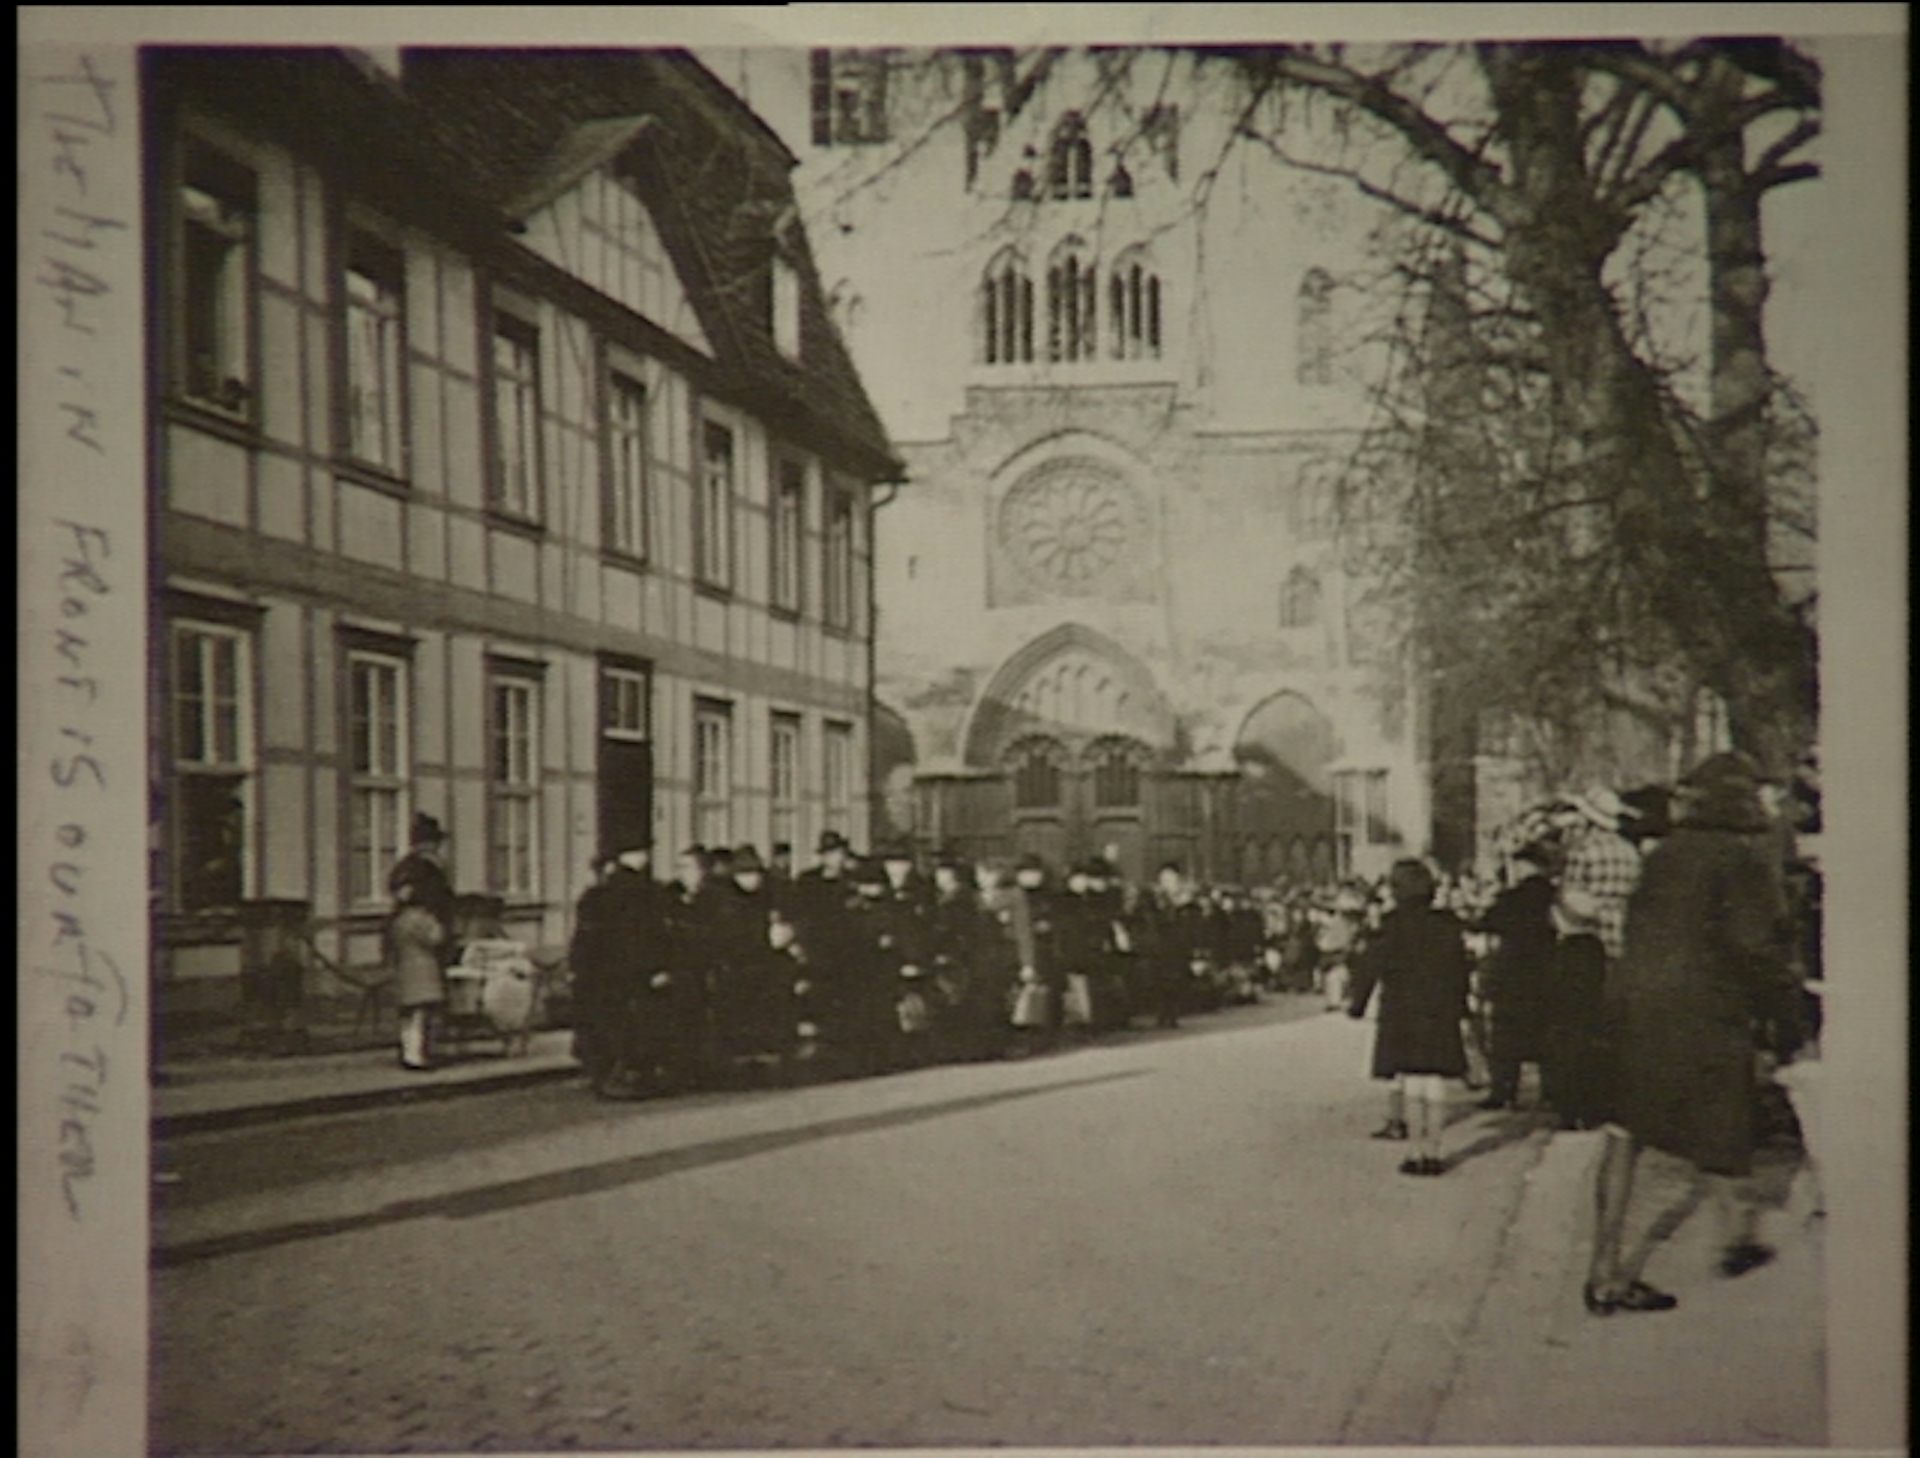 A large group of people assembled on the street in front of a timbered building and a large church, with people watching them on the other side of the street.